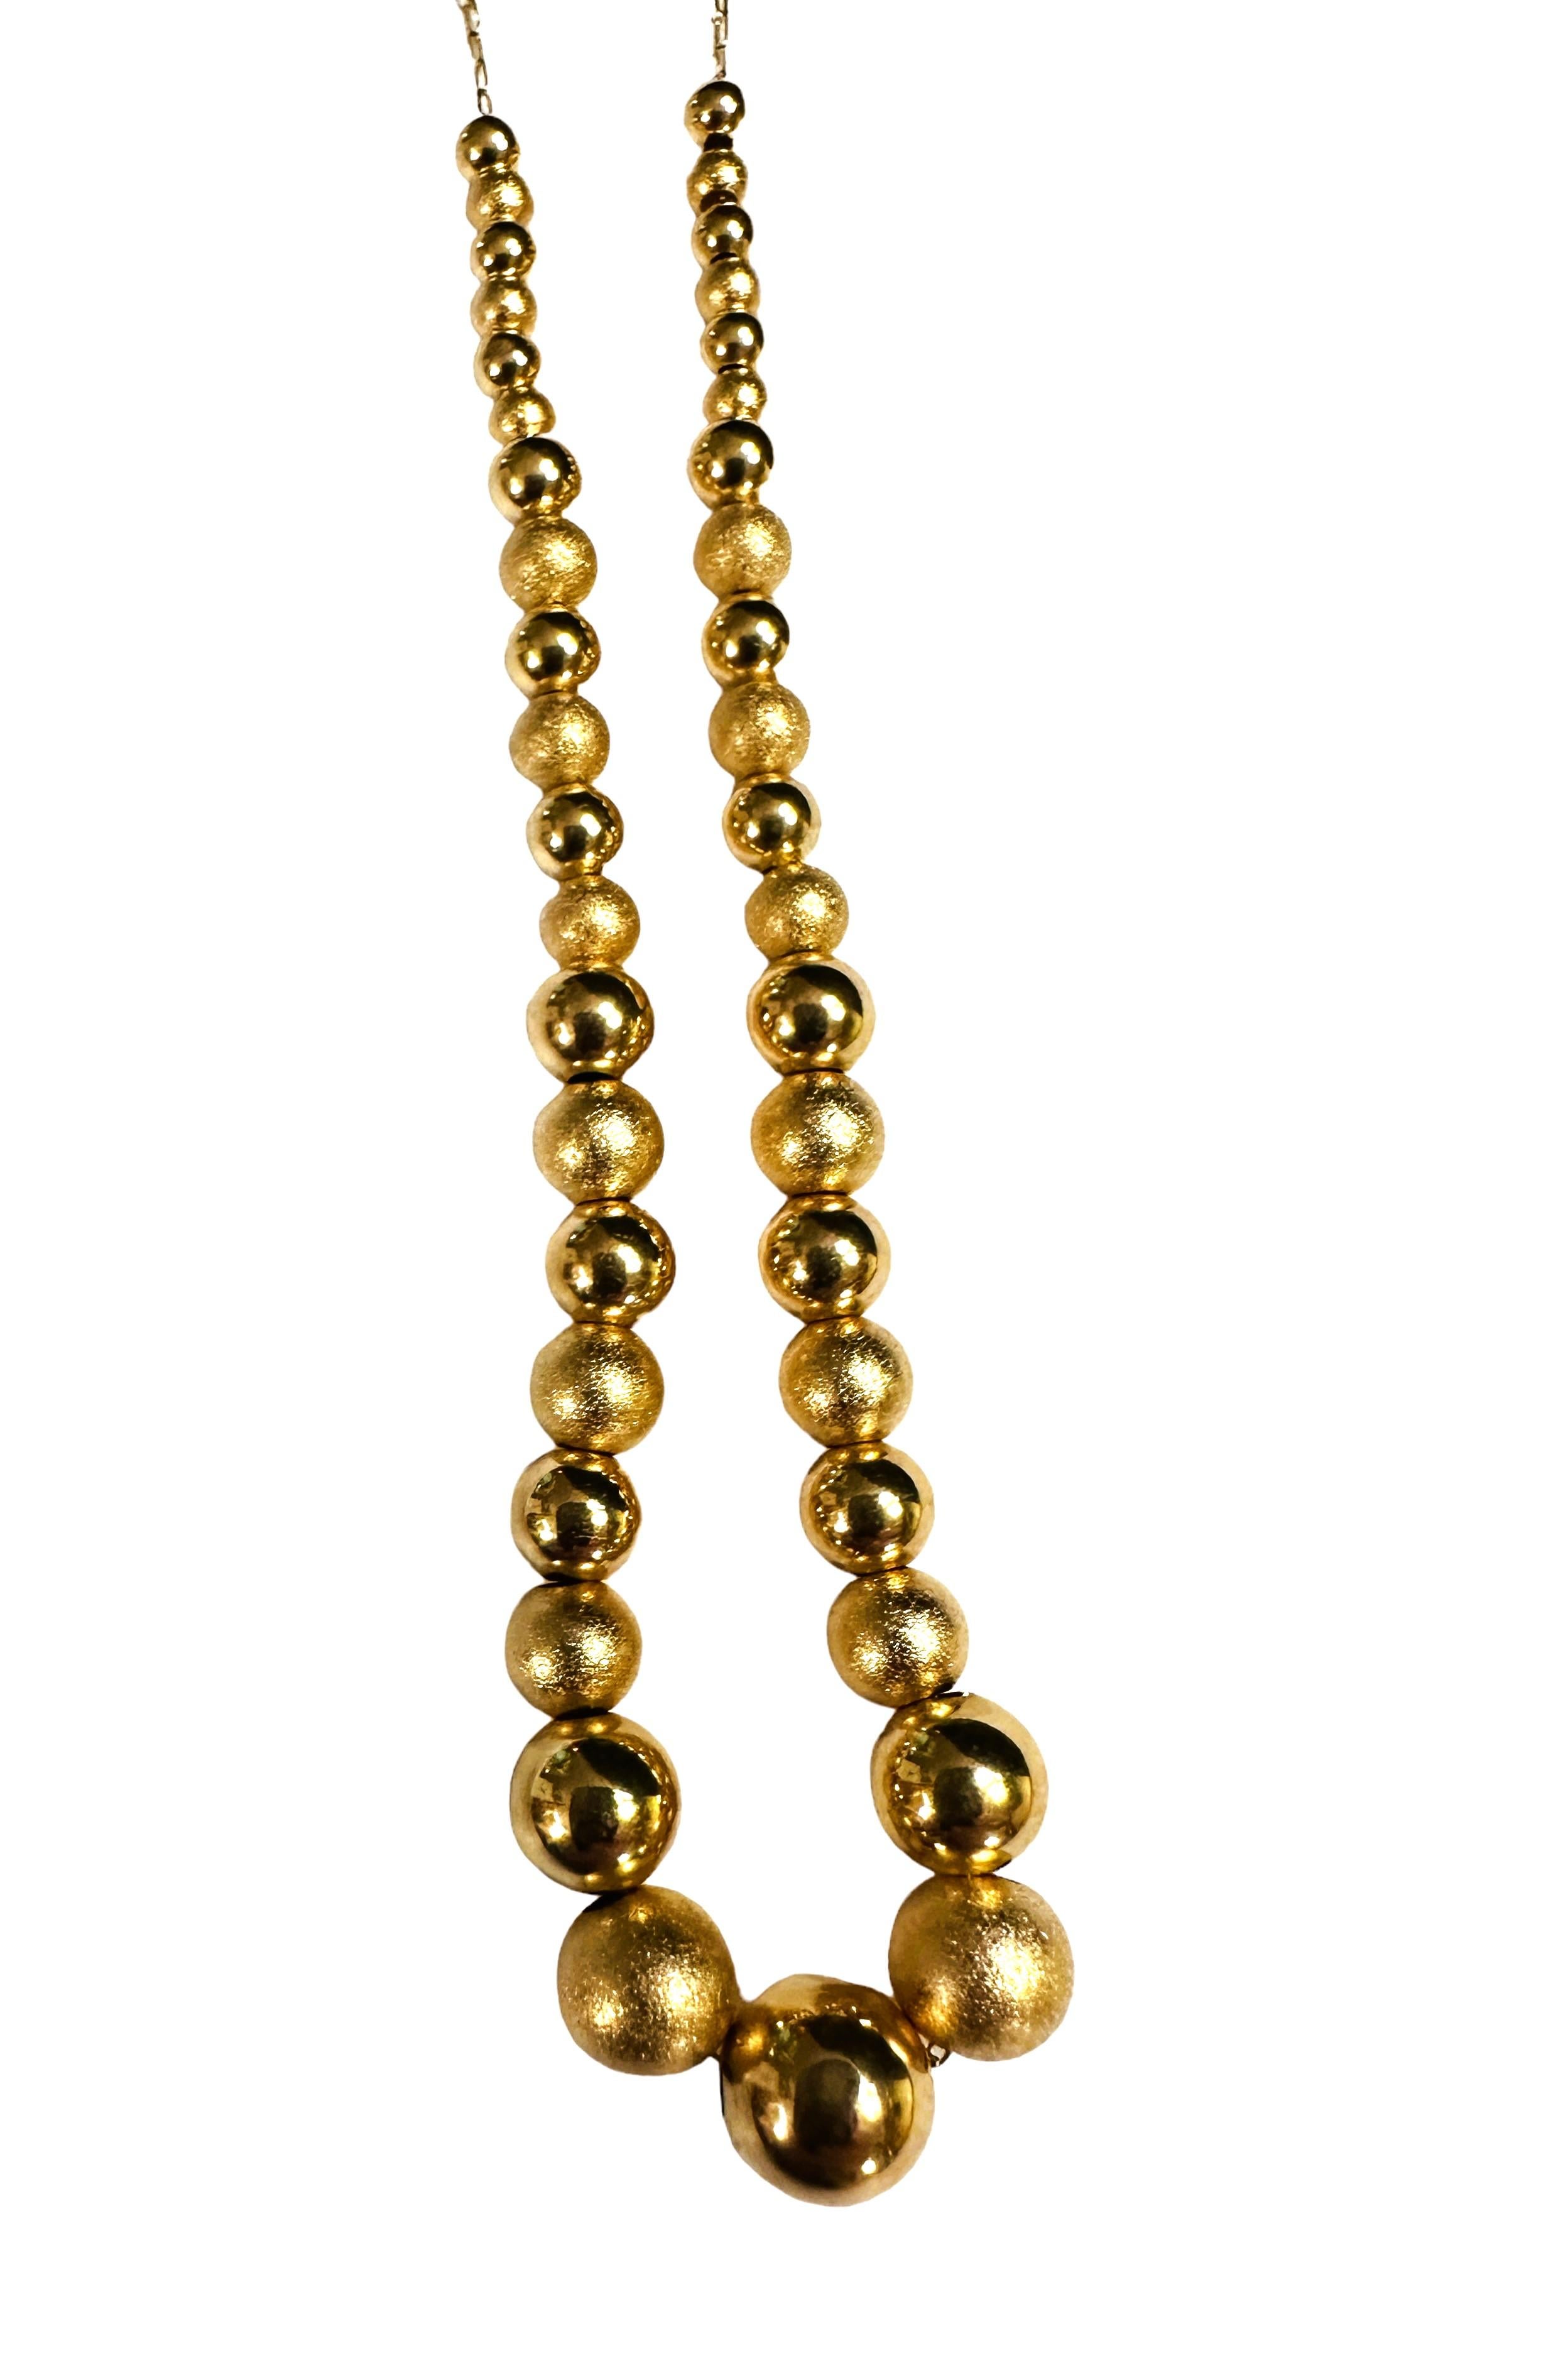 14k Yellow Gold Graduated Beaded Necklace 24 Inches In Excellent Condition For Sale In Eagan, MN